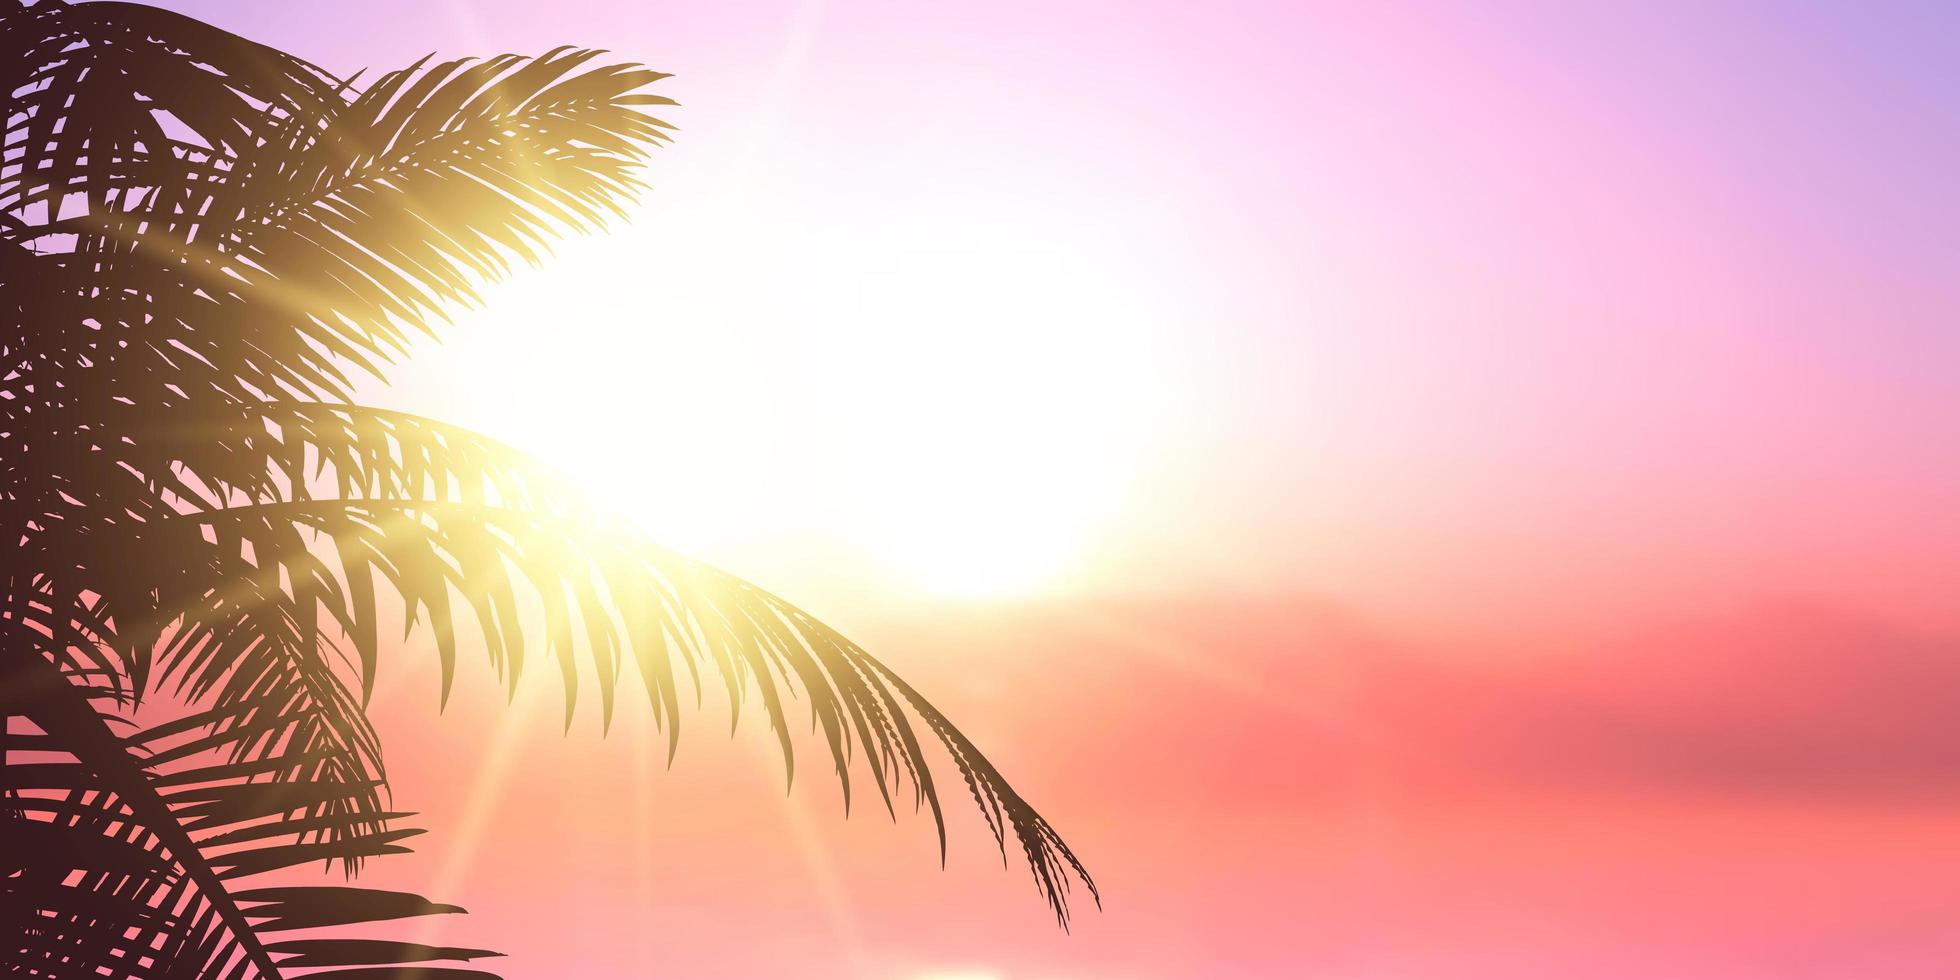 Summer banner design with palm tree leaves silhouette vector